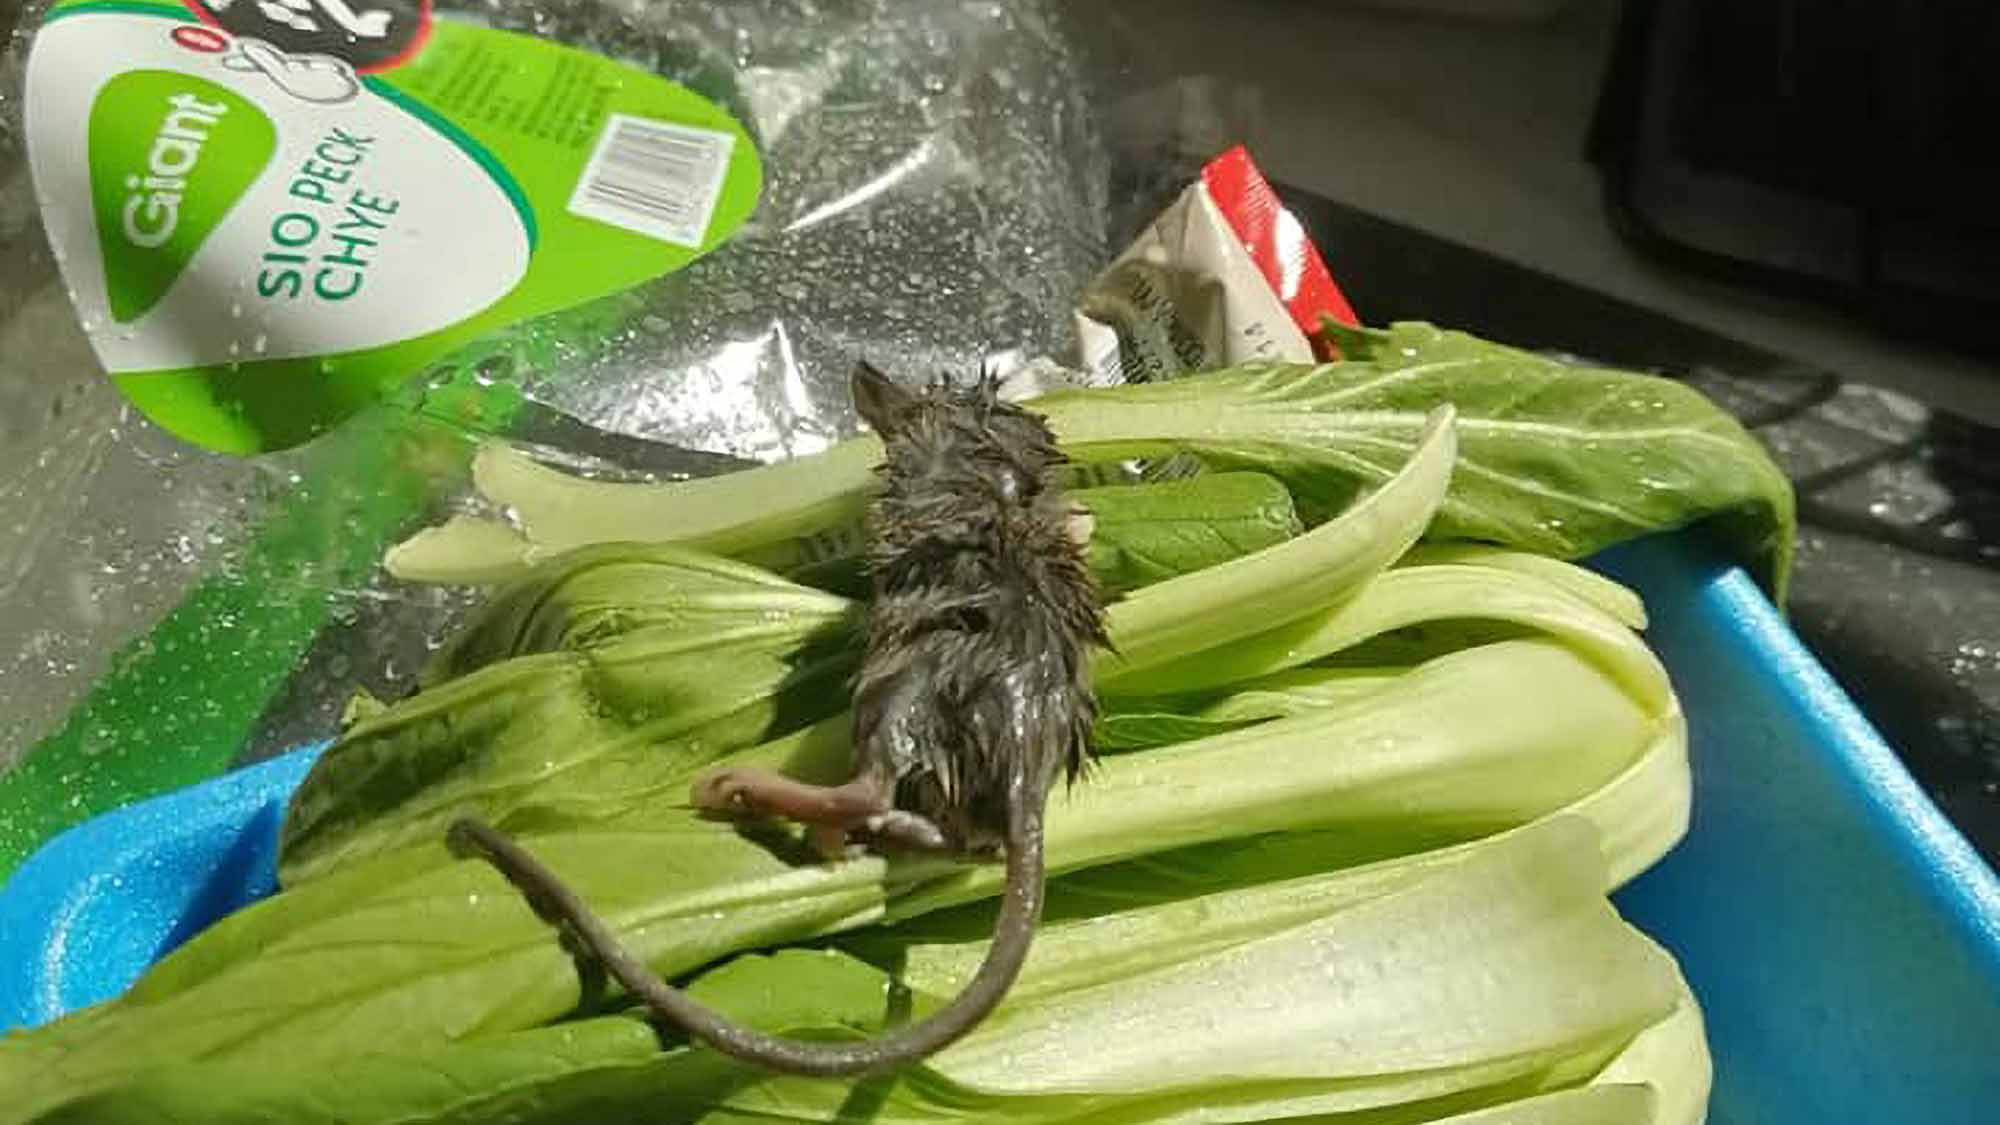 Read more about the article Horrified Shopper Finds Dead Rat In Veg Pack